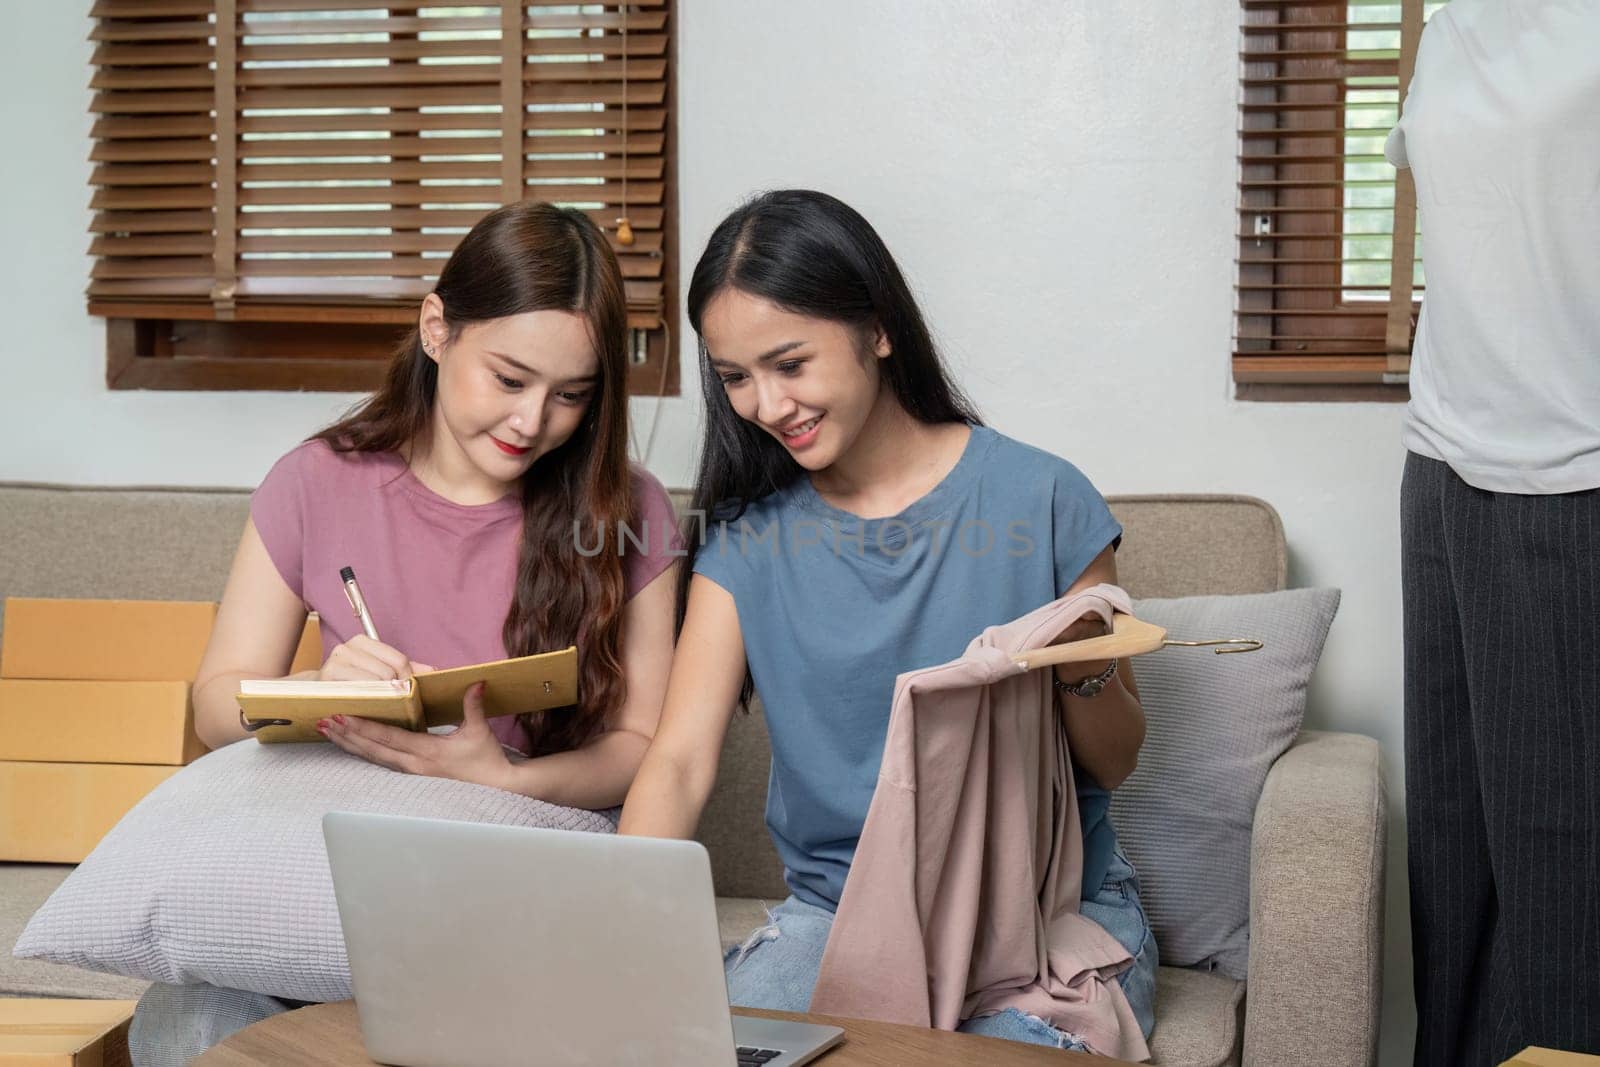 Lesbian couple working together on their online clothing business, using a laptop and taking notes in a cozy home setting.